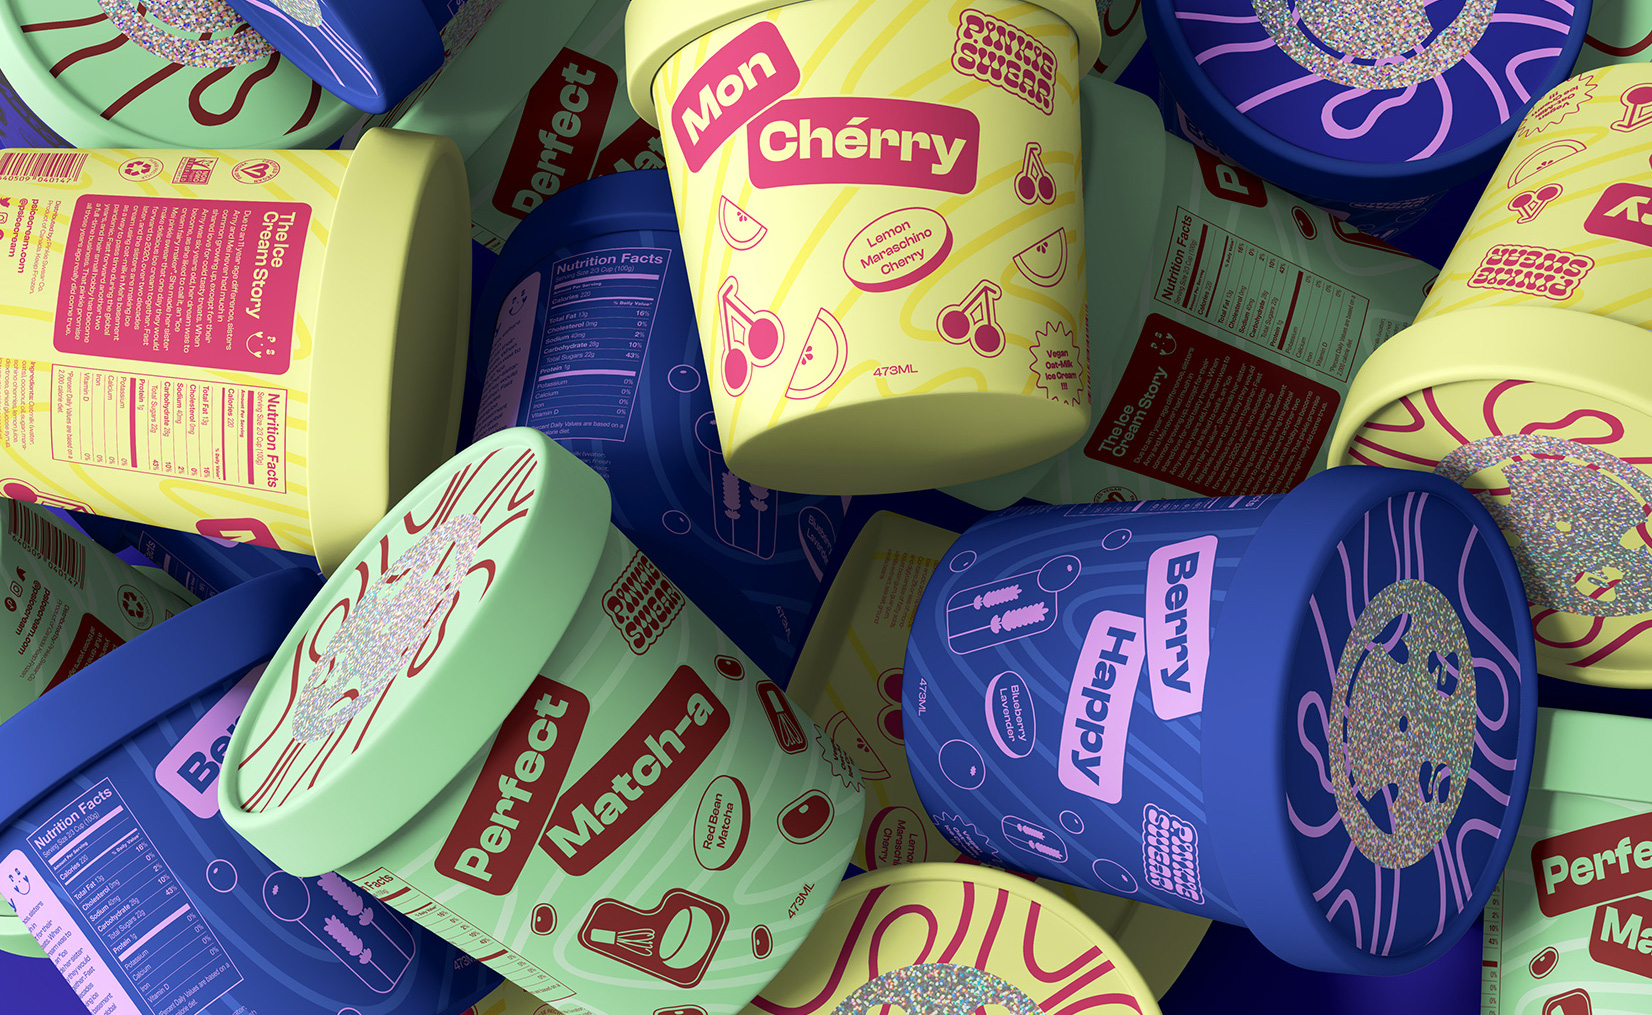 A collection of ice cream tubs with nice packaging.